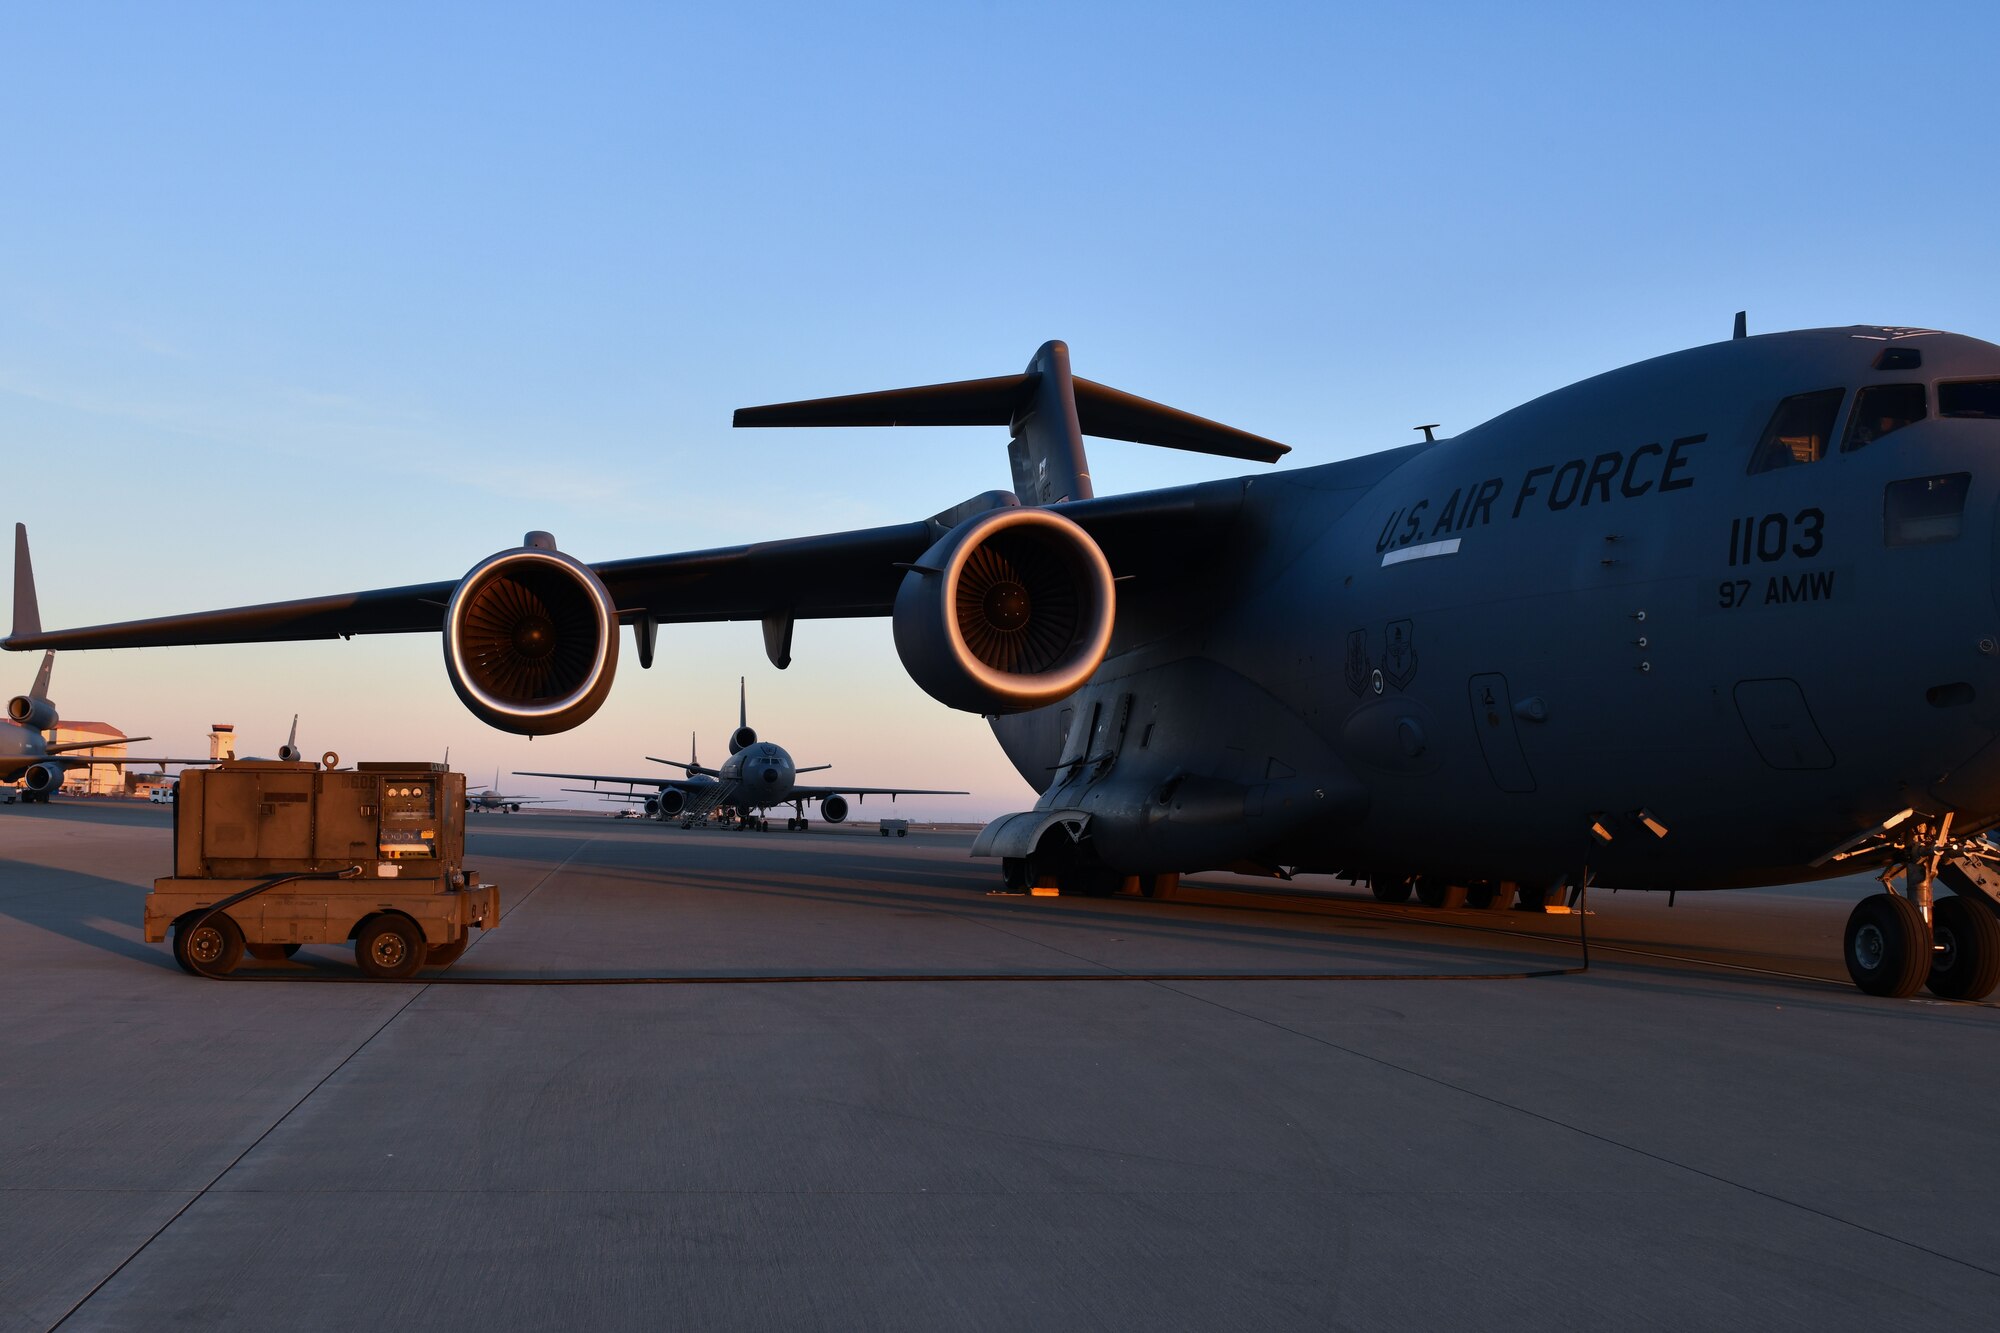 A C-17 Globemaster III from Altus Air Force Base (AFB) is shown at Travis AFB, California, Jan. 24, 2023. Travis AFB is home to a fleet of C-5 Galaxies, KC-10 Extenders and  C-17s. (U.S. Air Force photo by Airman 1st Class Miyah Gray)